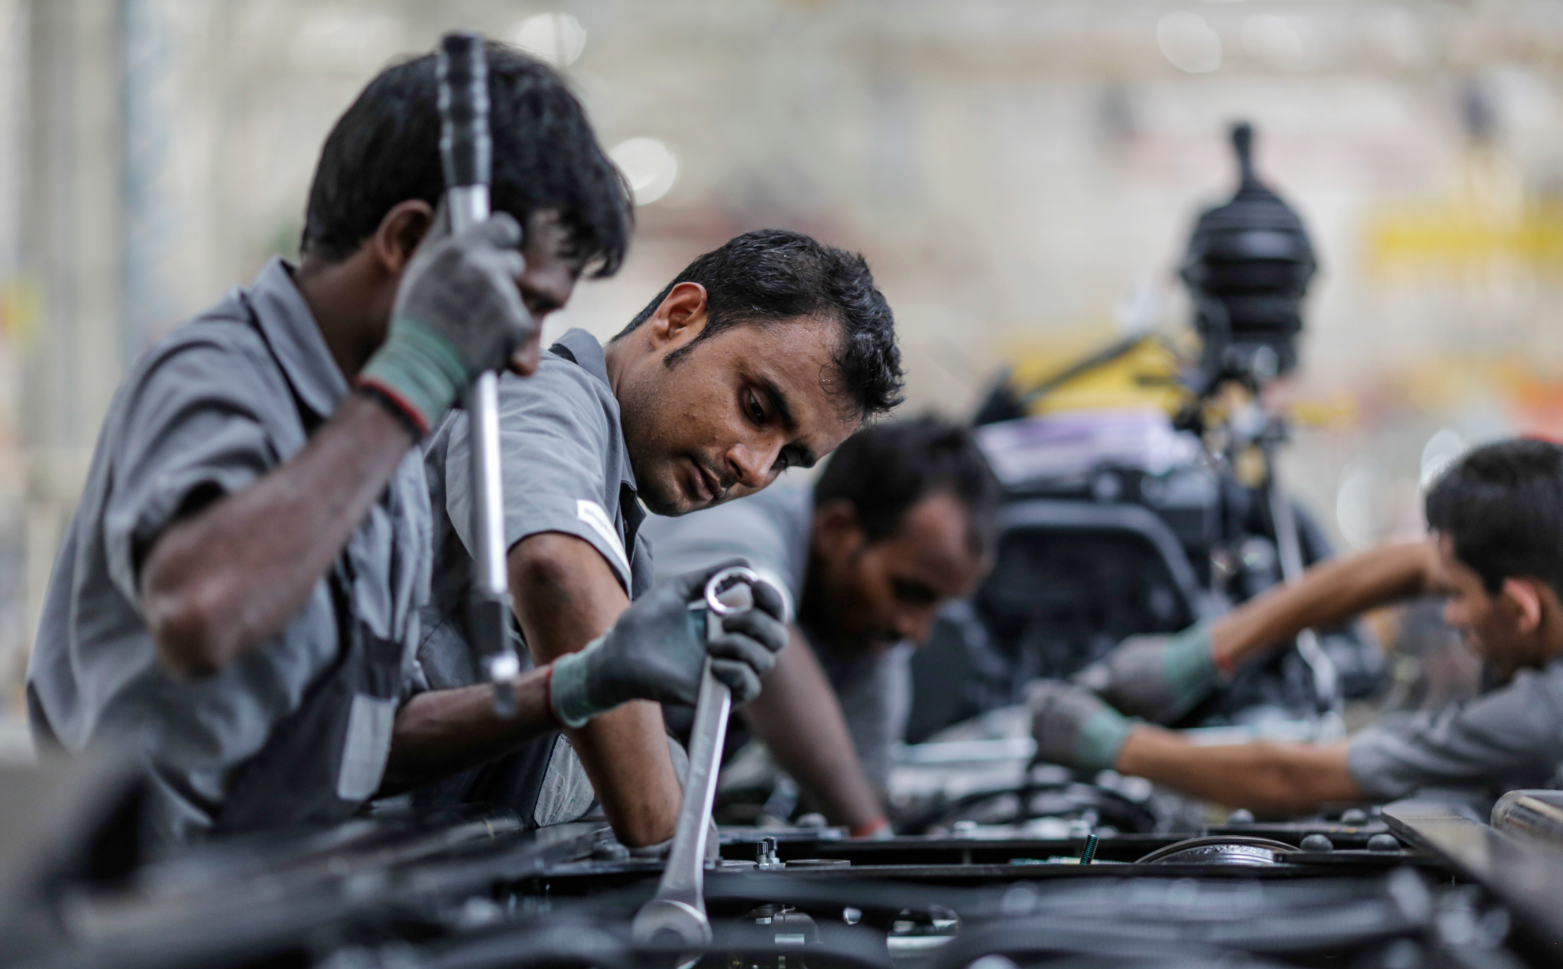 India’s workforce is still not fully trained to handle Russian technology. Source: Getty Images